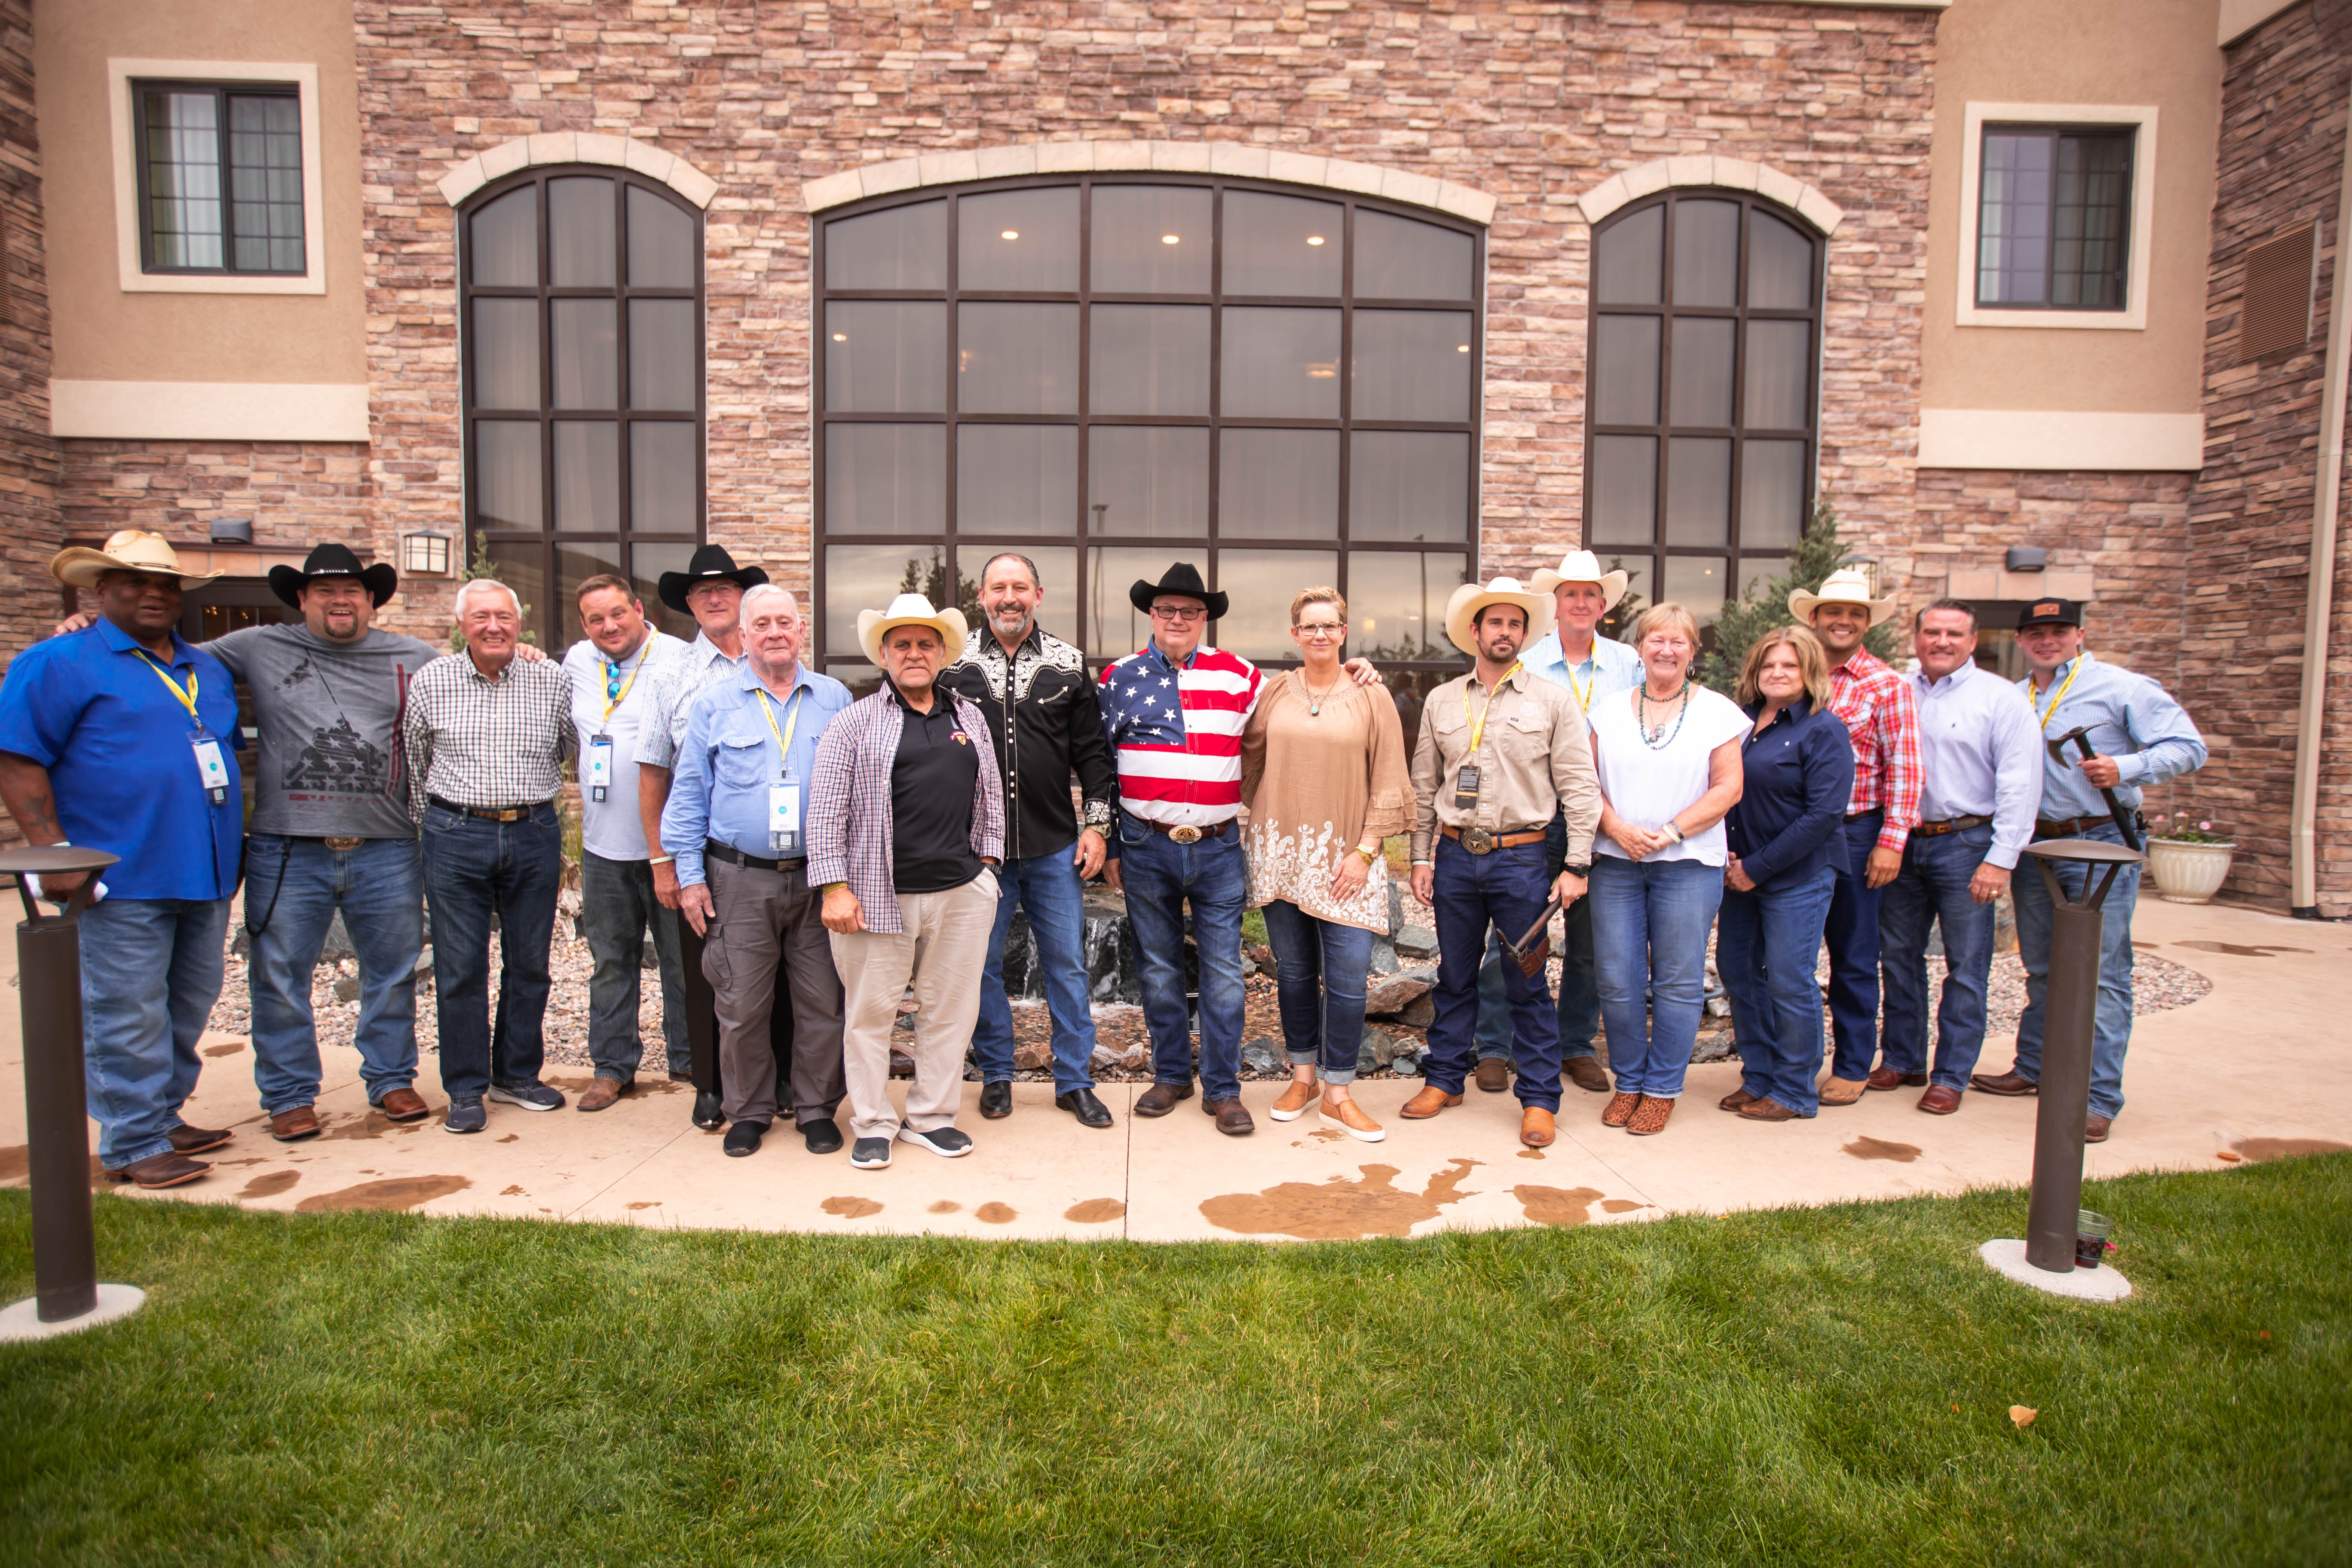 Pace-O-Matic Donates $85,000 to Veterans During CFD Sponsored by Cowboy Skill